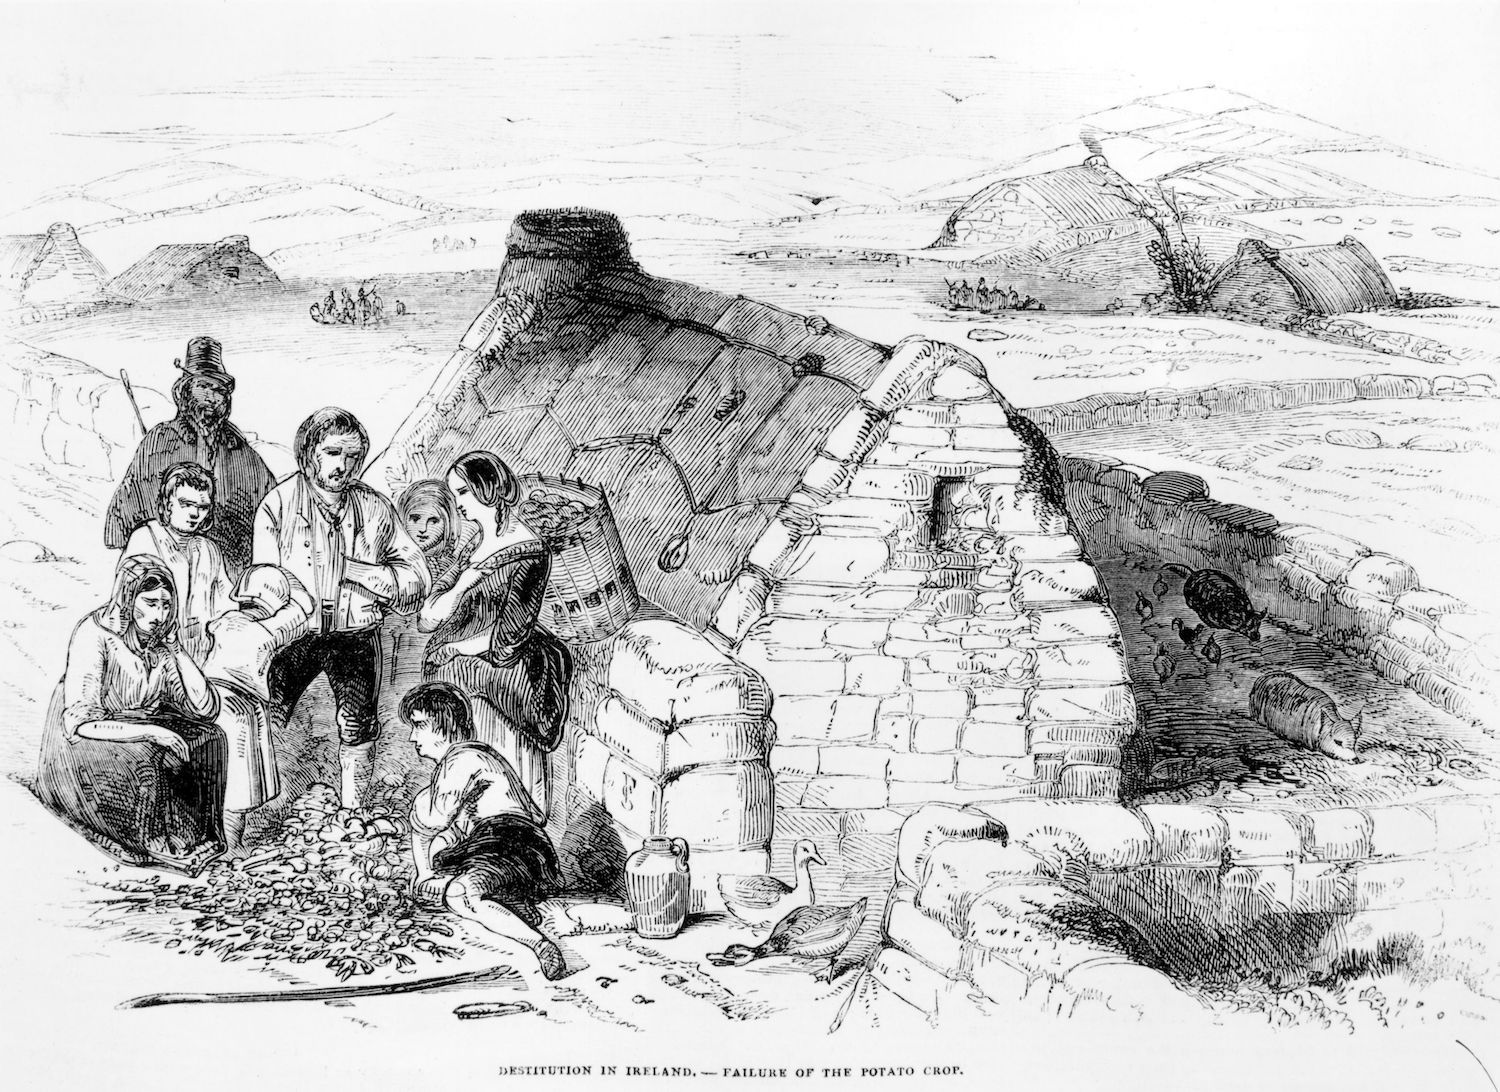 Horrific tale of a Mayo village's death during the Great Famine